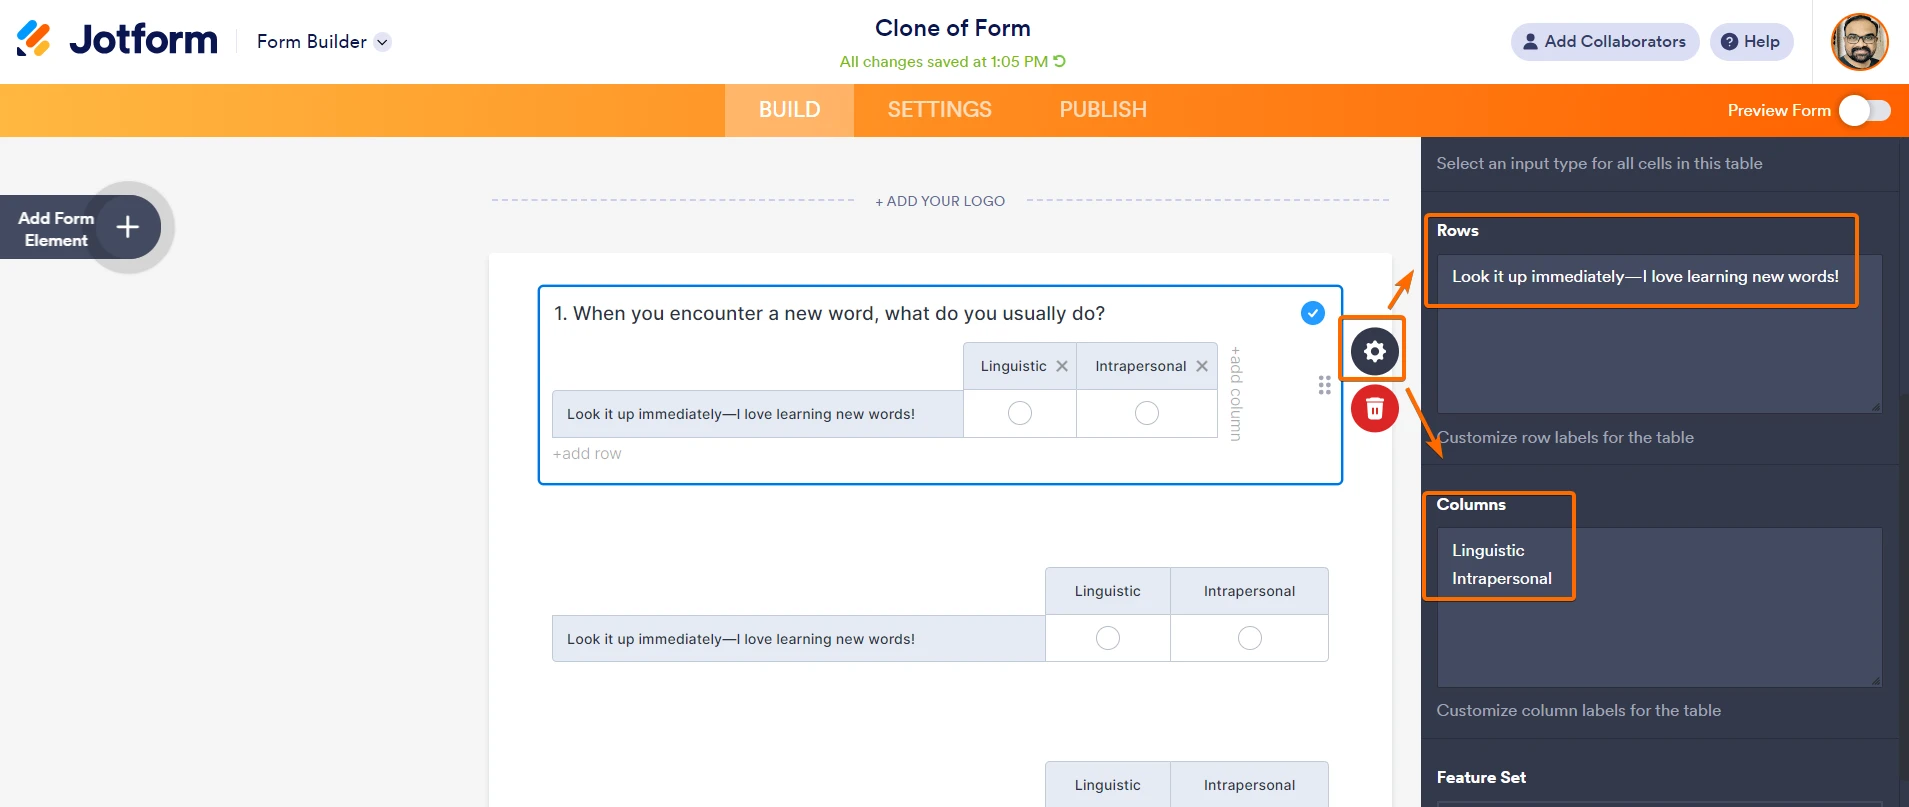 How to Make a Personality Quiz Form with Different Category? Image 1 Screenshot 50